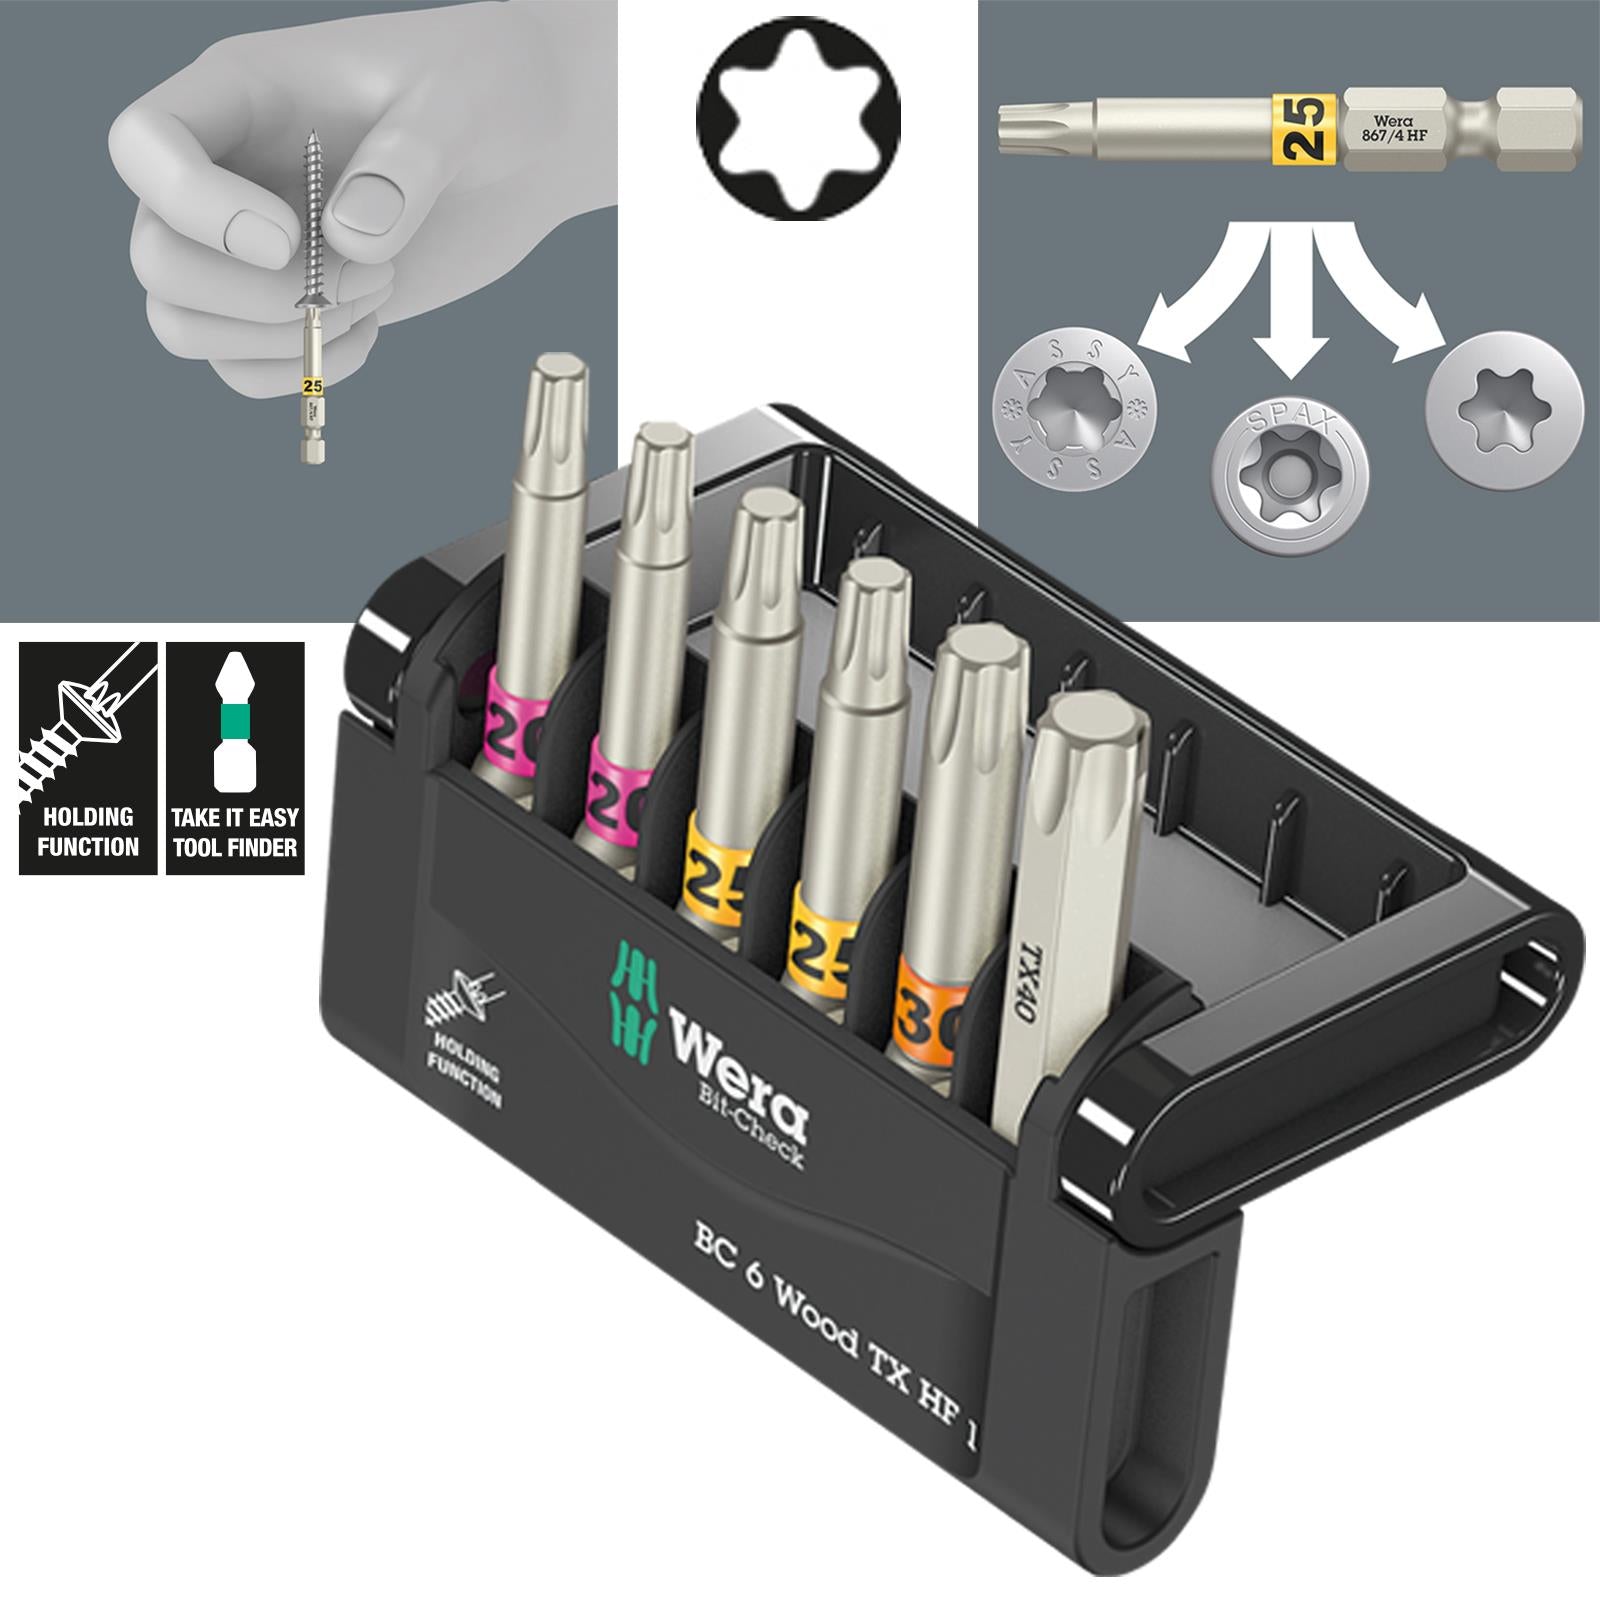 Wera Wood Screwdriver Bits Torx with Holding Function 6 Piece Bit-Check 6 Wood TX HF 1